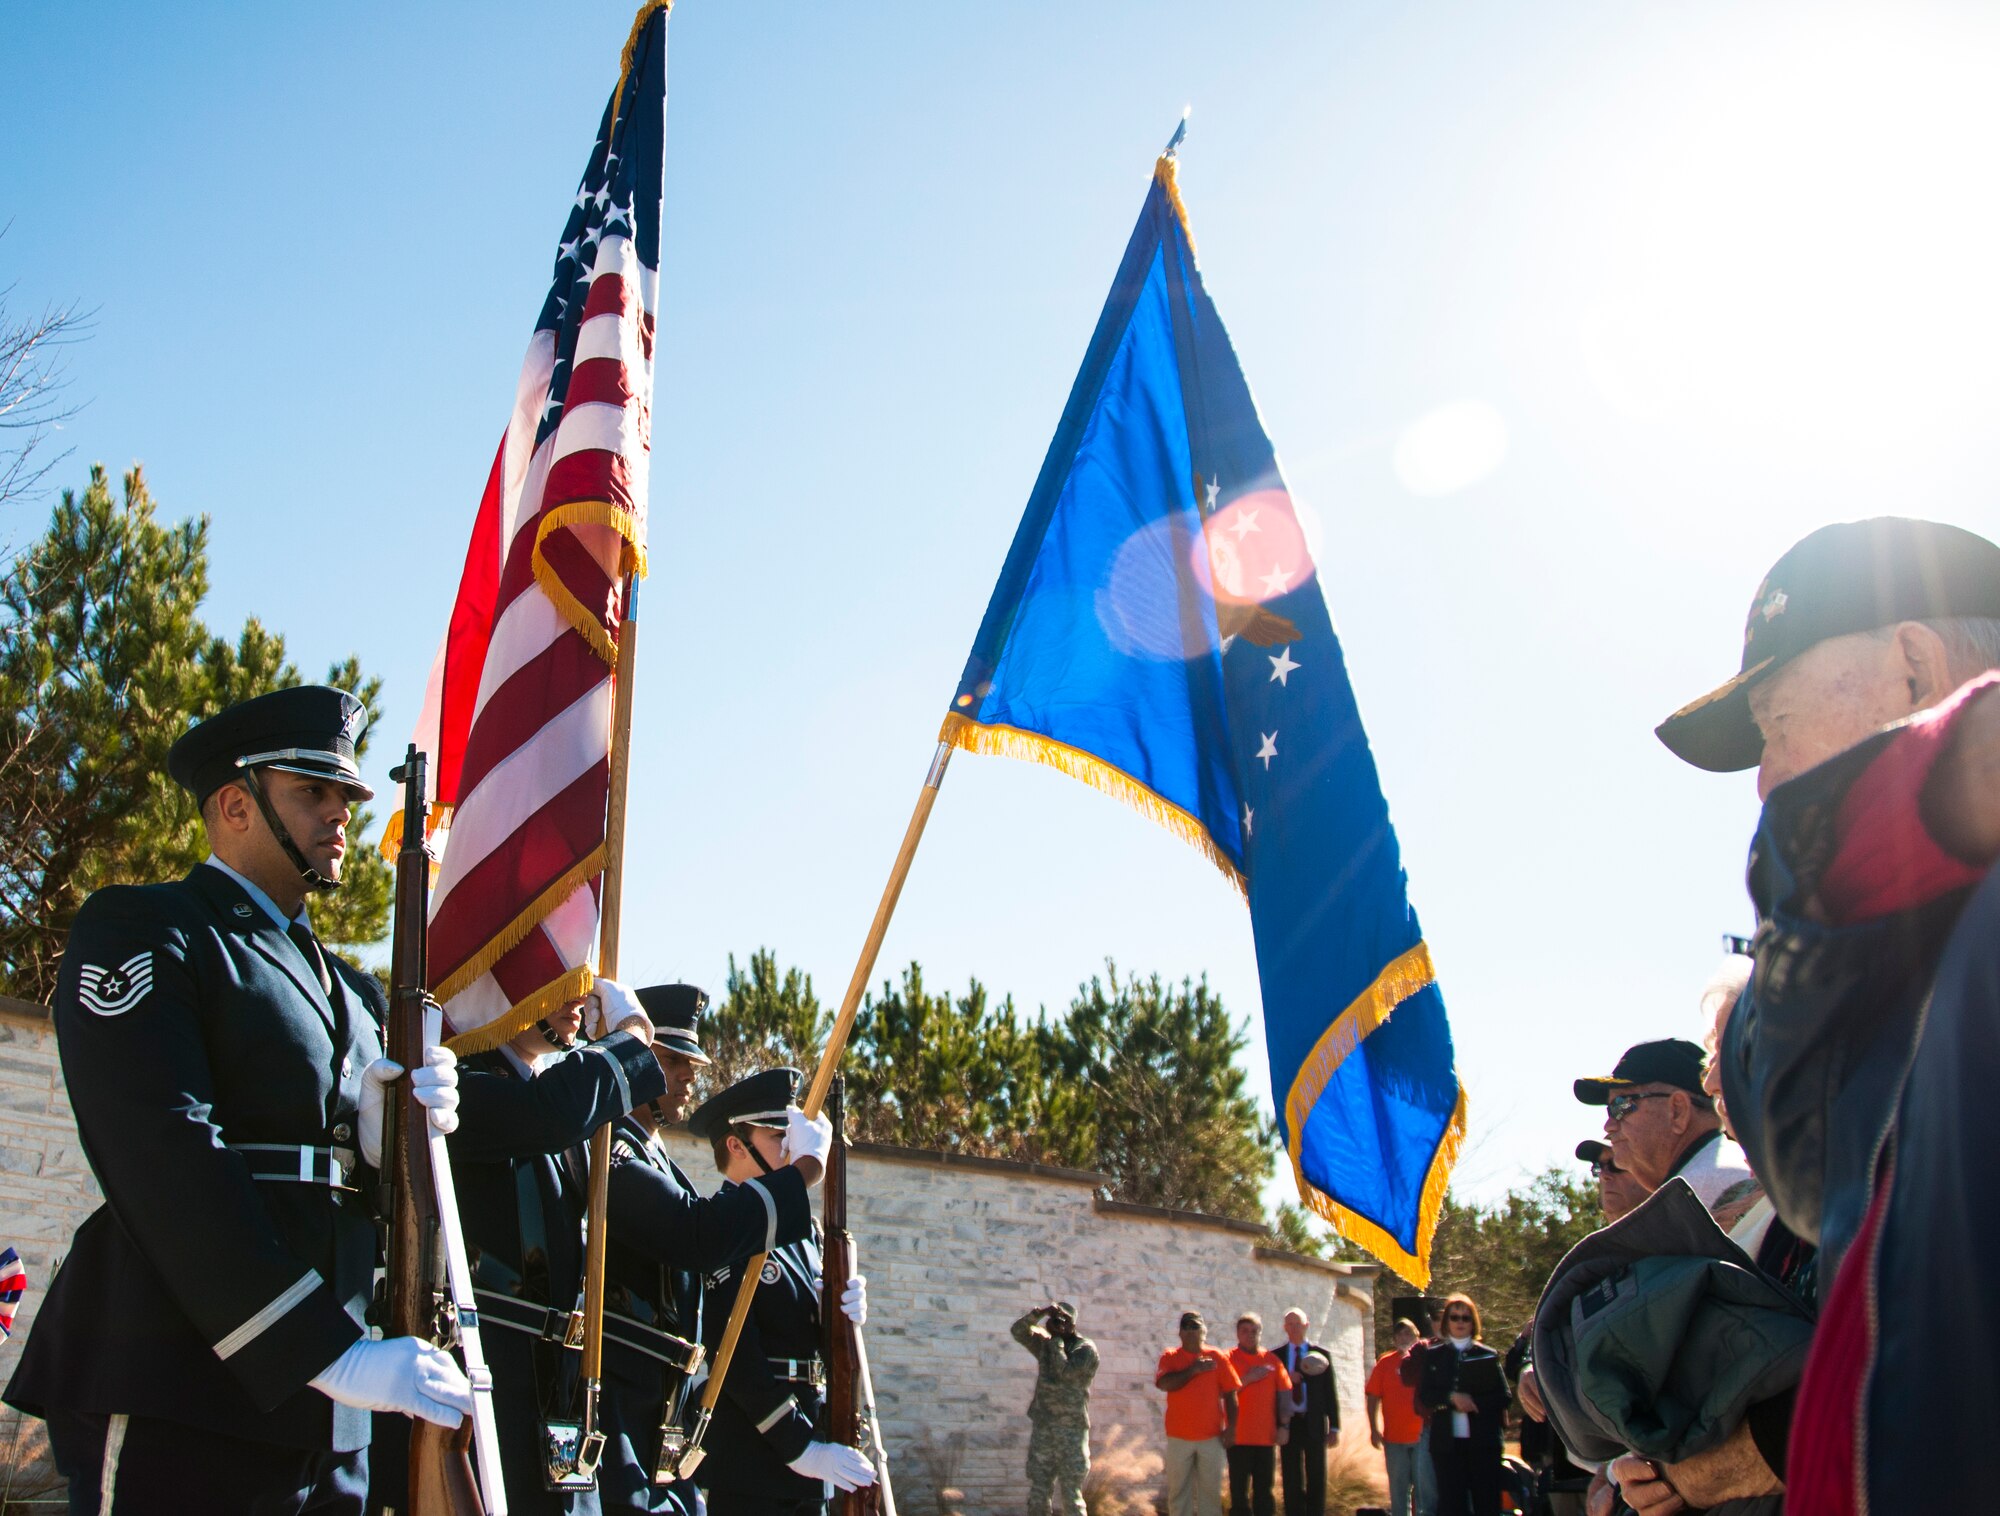 Honor Guard members from Dobbins Air Reserve Base, Ga. present the colors for Wreaths Across America ceremony at Georgia National Cemetery in Canton, Ga. Dec. 13, 2014. The vision of the U.S. Air Force Honor Guard is to ensure a legacy of Airmen who promote the mission, protect the standards, perfect the image and preserve the heritage of the organization. (U.S. Air Force photo/Senior Airman Daniel Phelps)